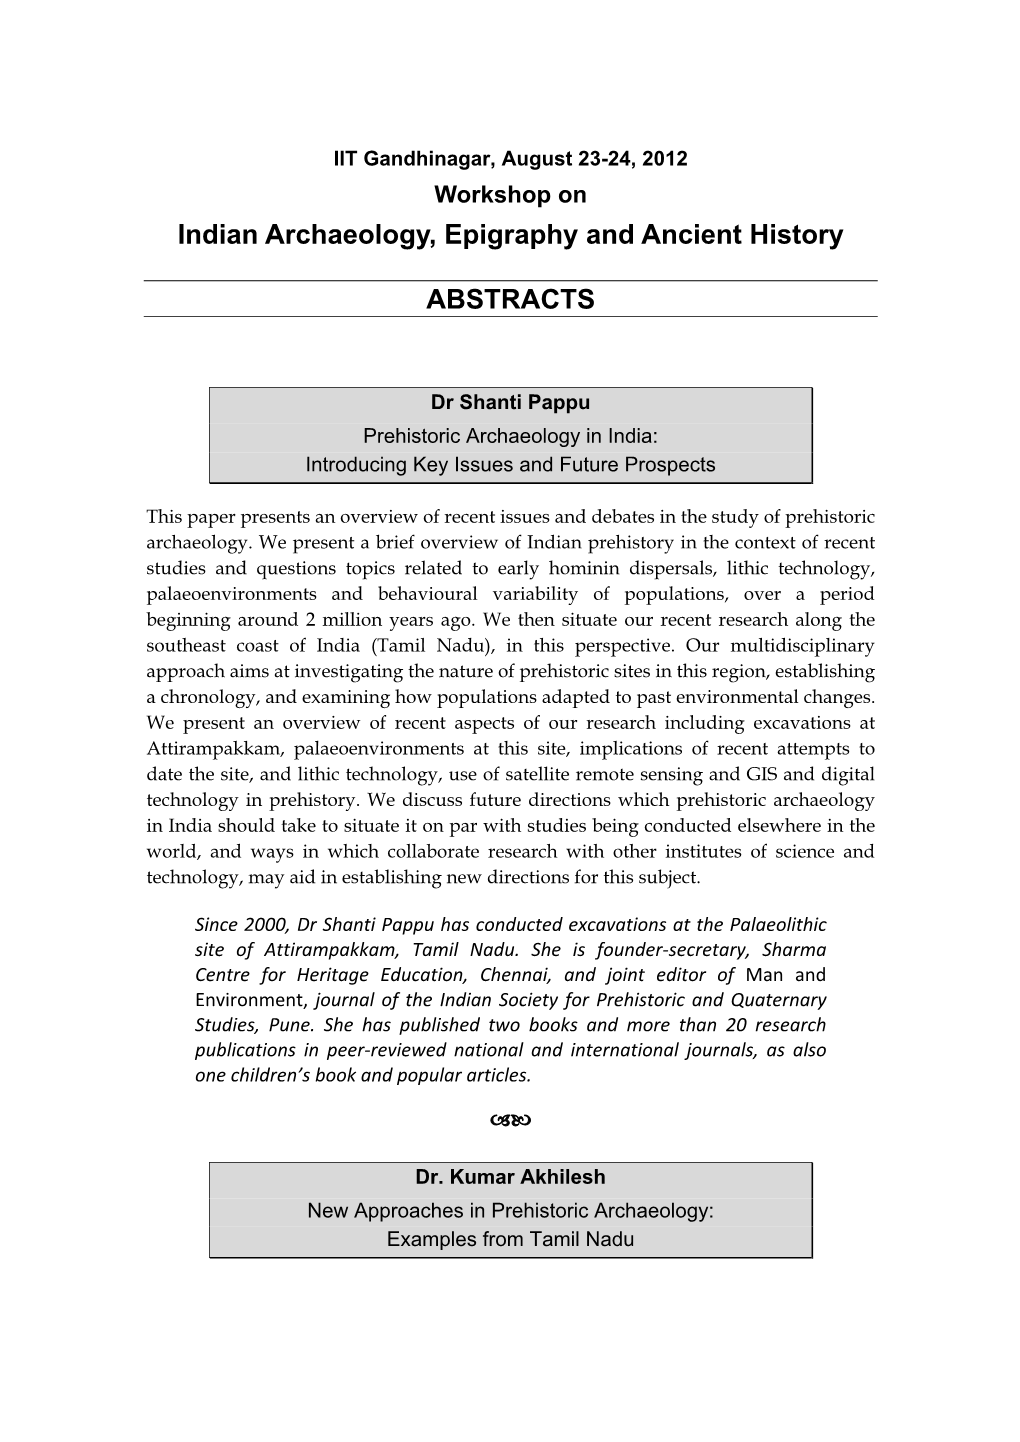 Indian Archaeology, Epigraphy and Ancient History ABSTRACTS